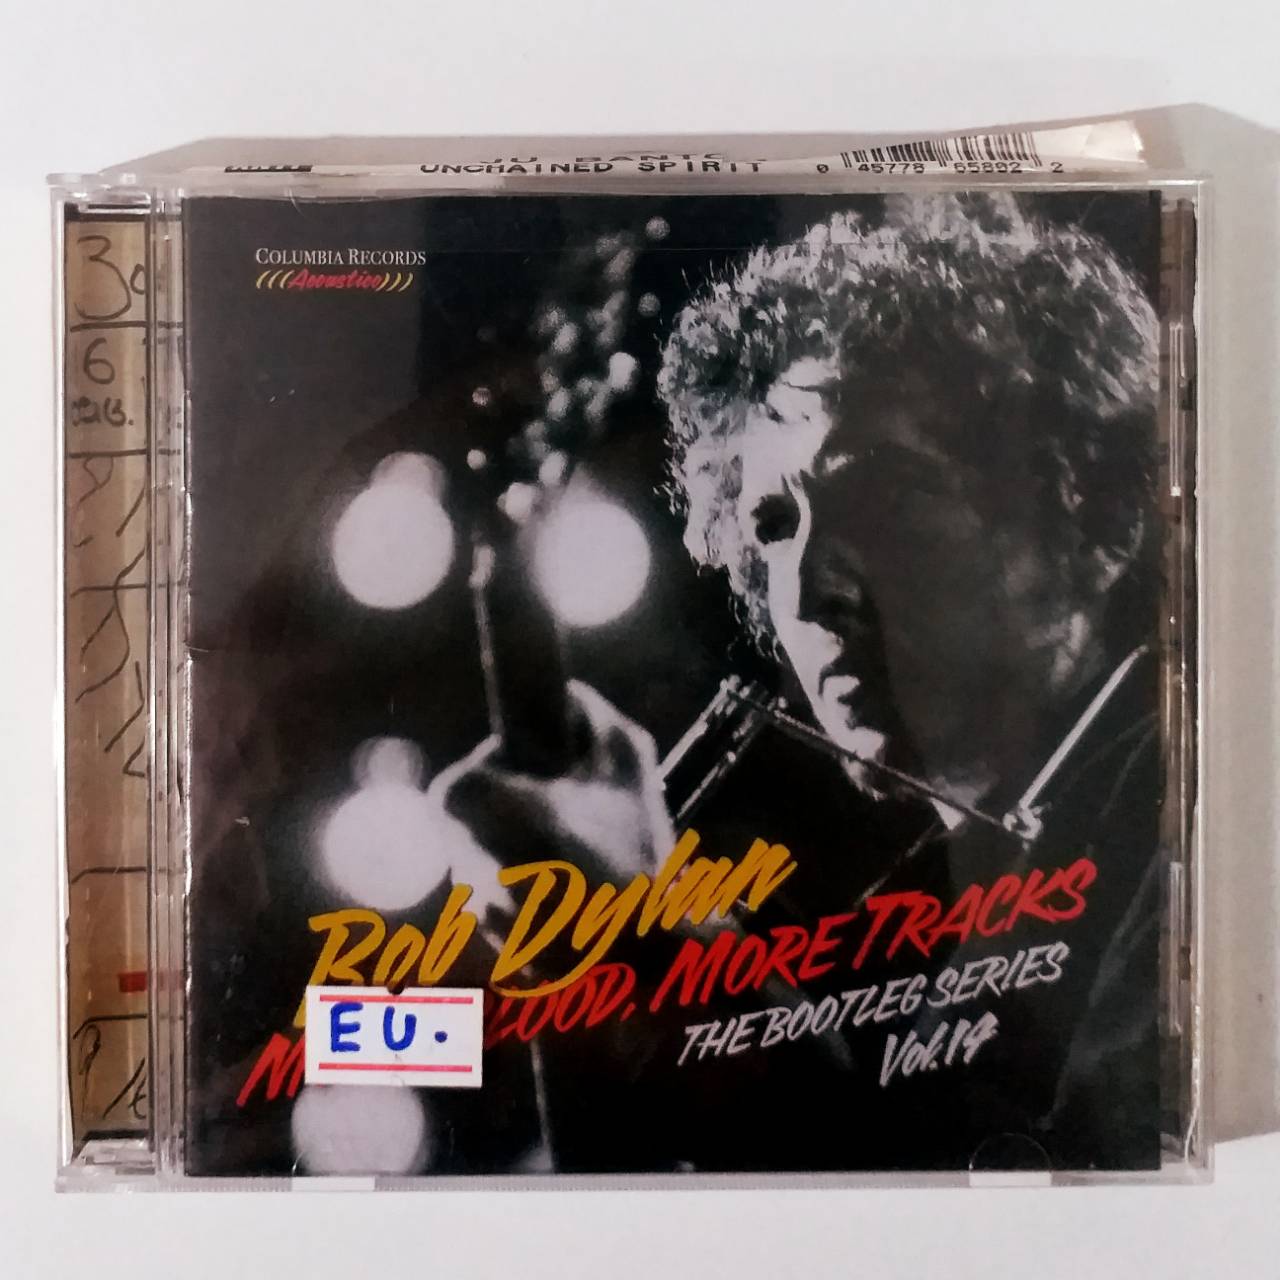 CD BOB DYLAN MORE BLOOD, MORE TRACKS THE BOOTLEG SERIES VOL.14 MADE IN EU